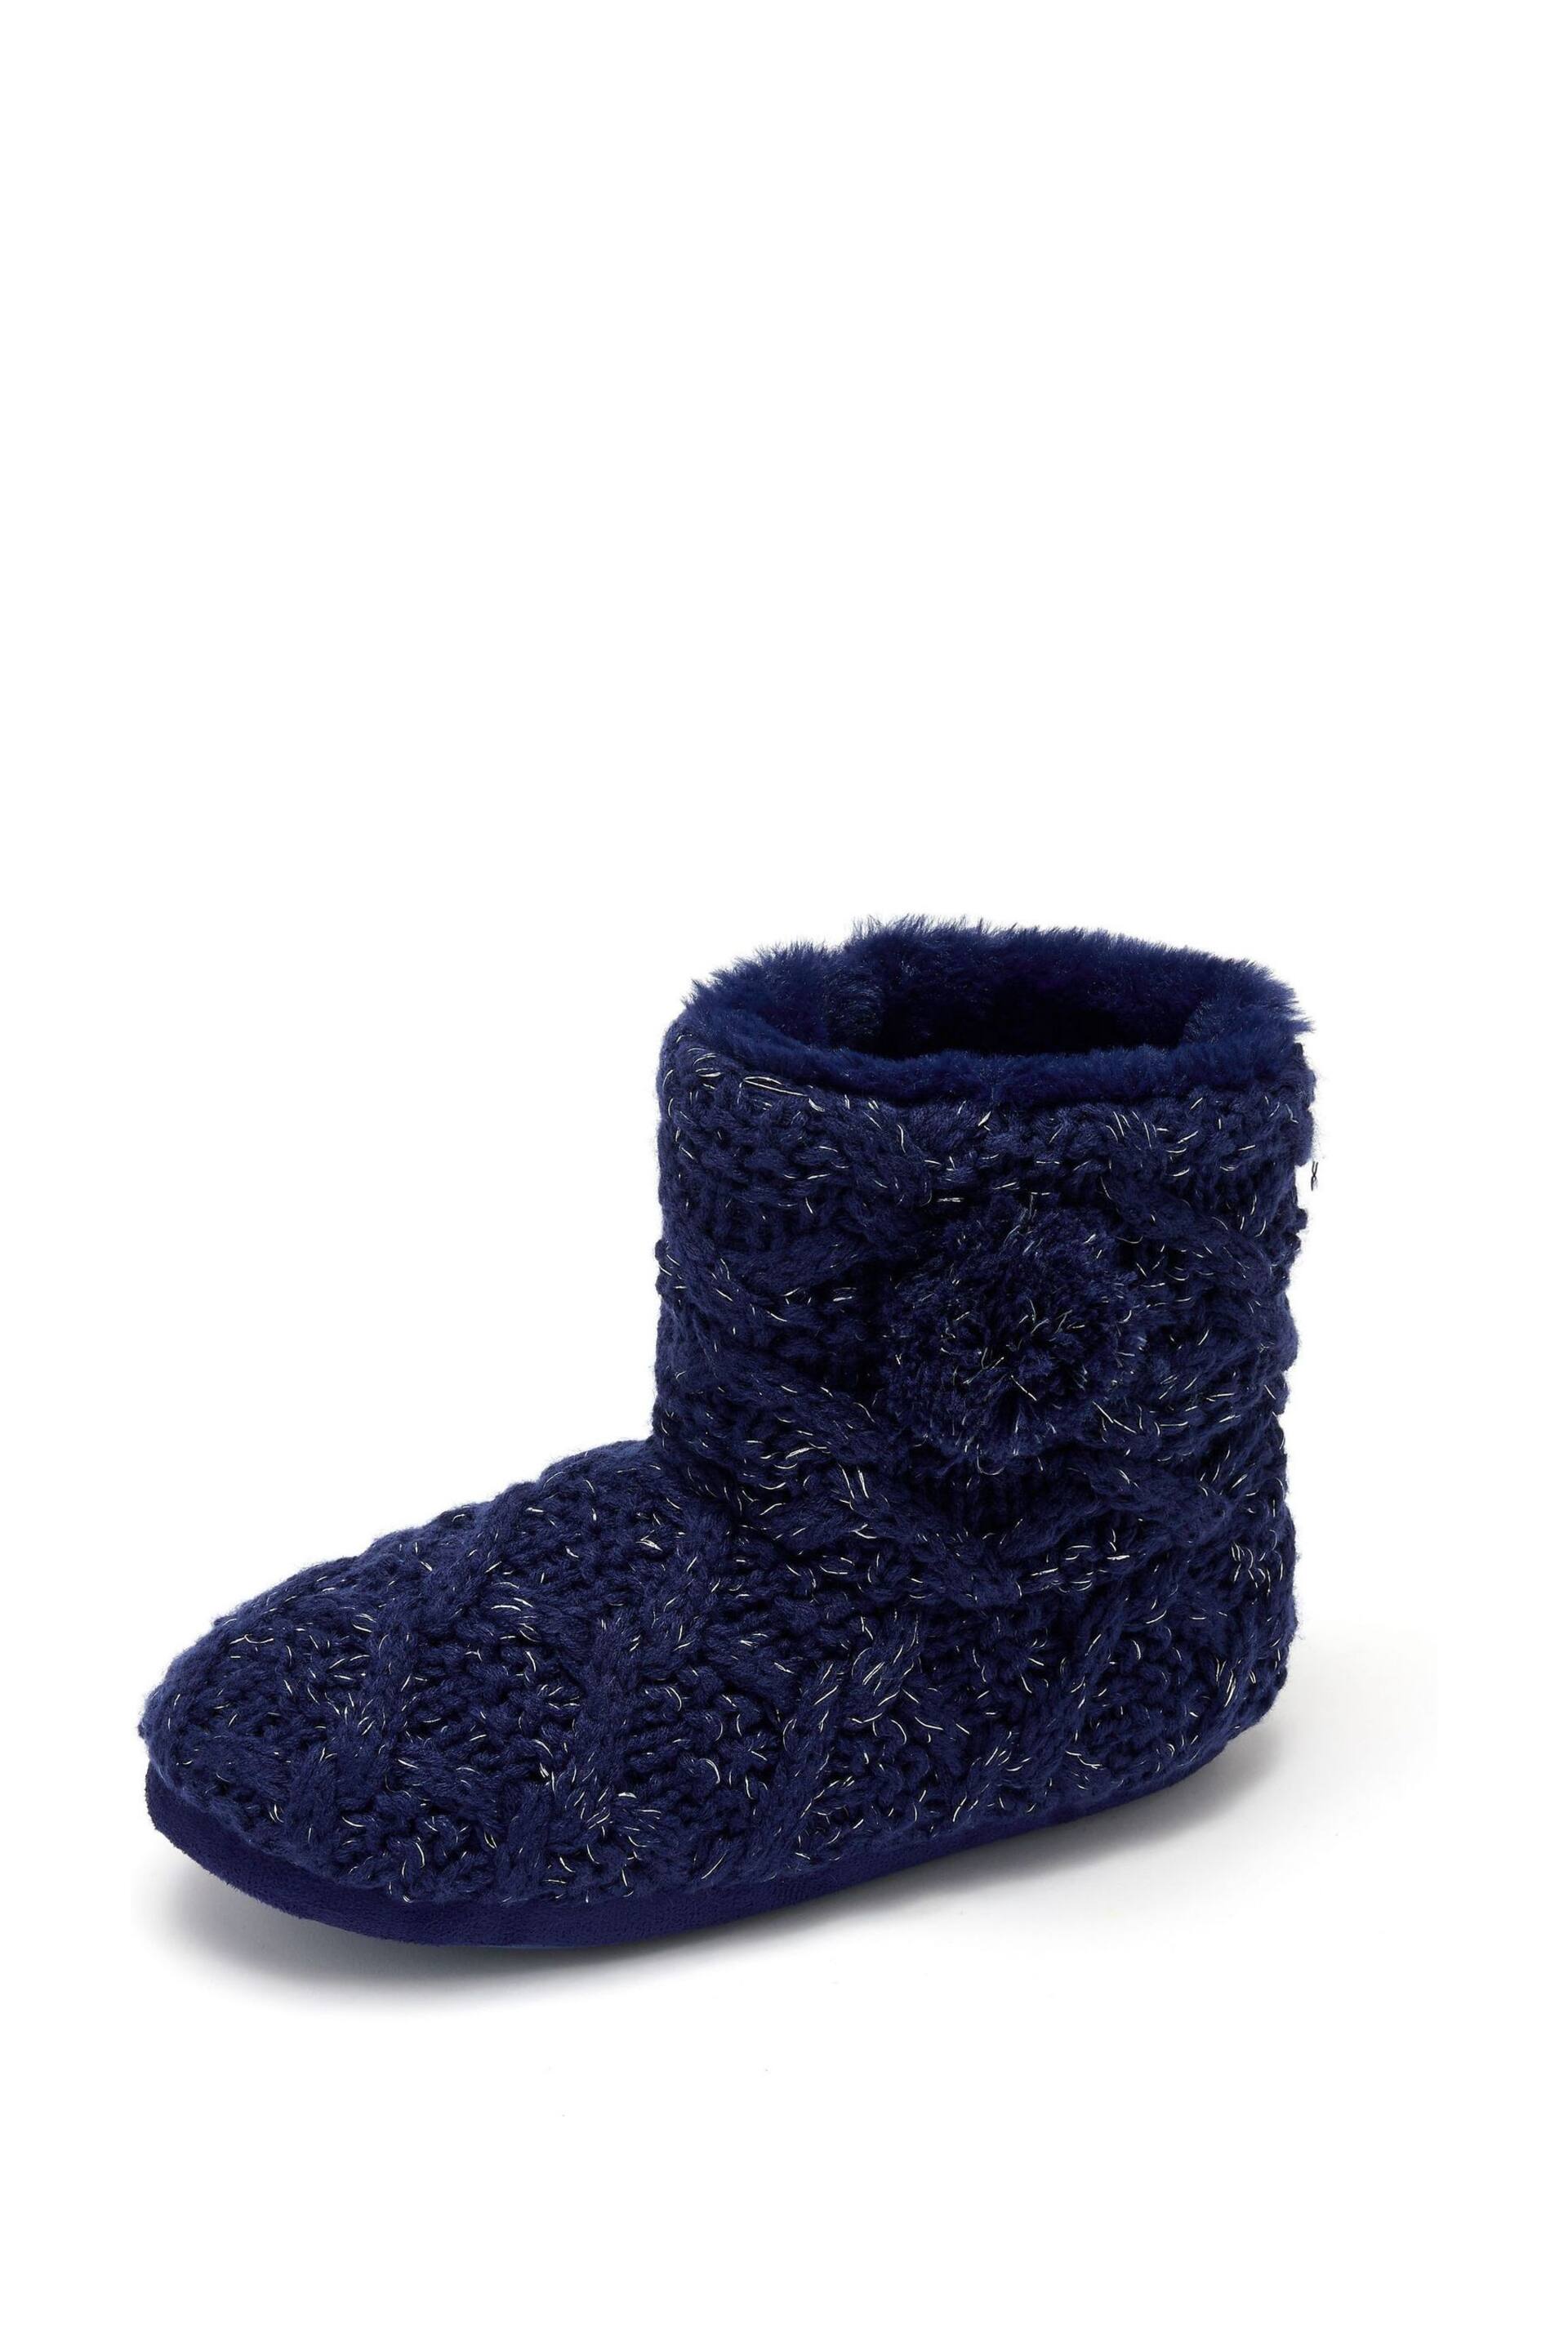 Pour Moi Blue Cable Knit Faux Fur Lined Bootie Slippers - Image 3 of 3